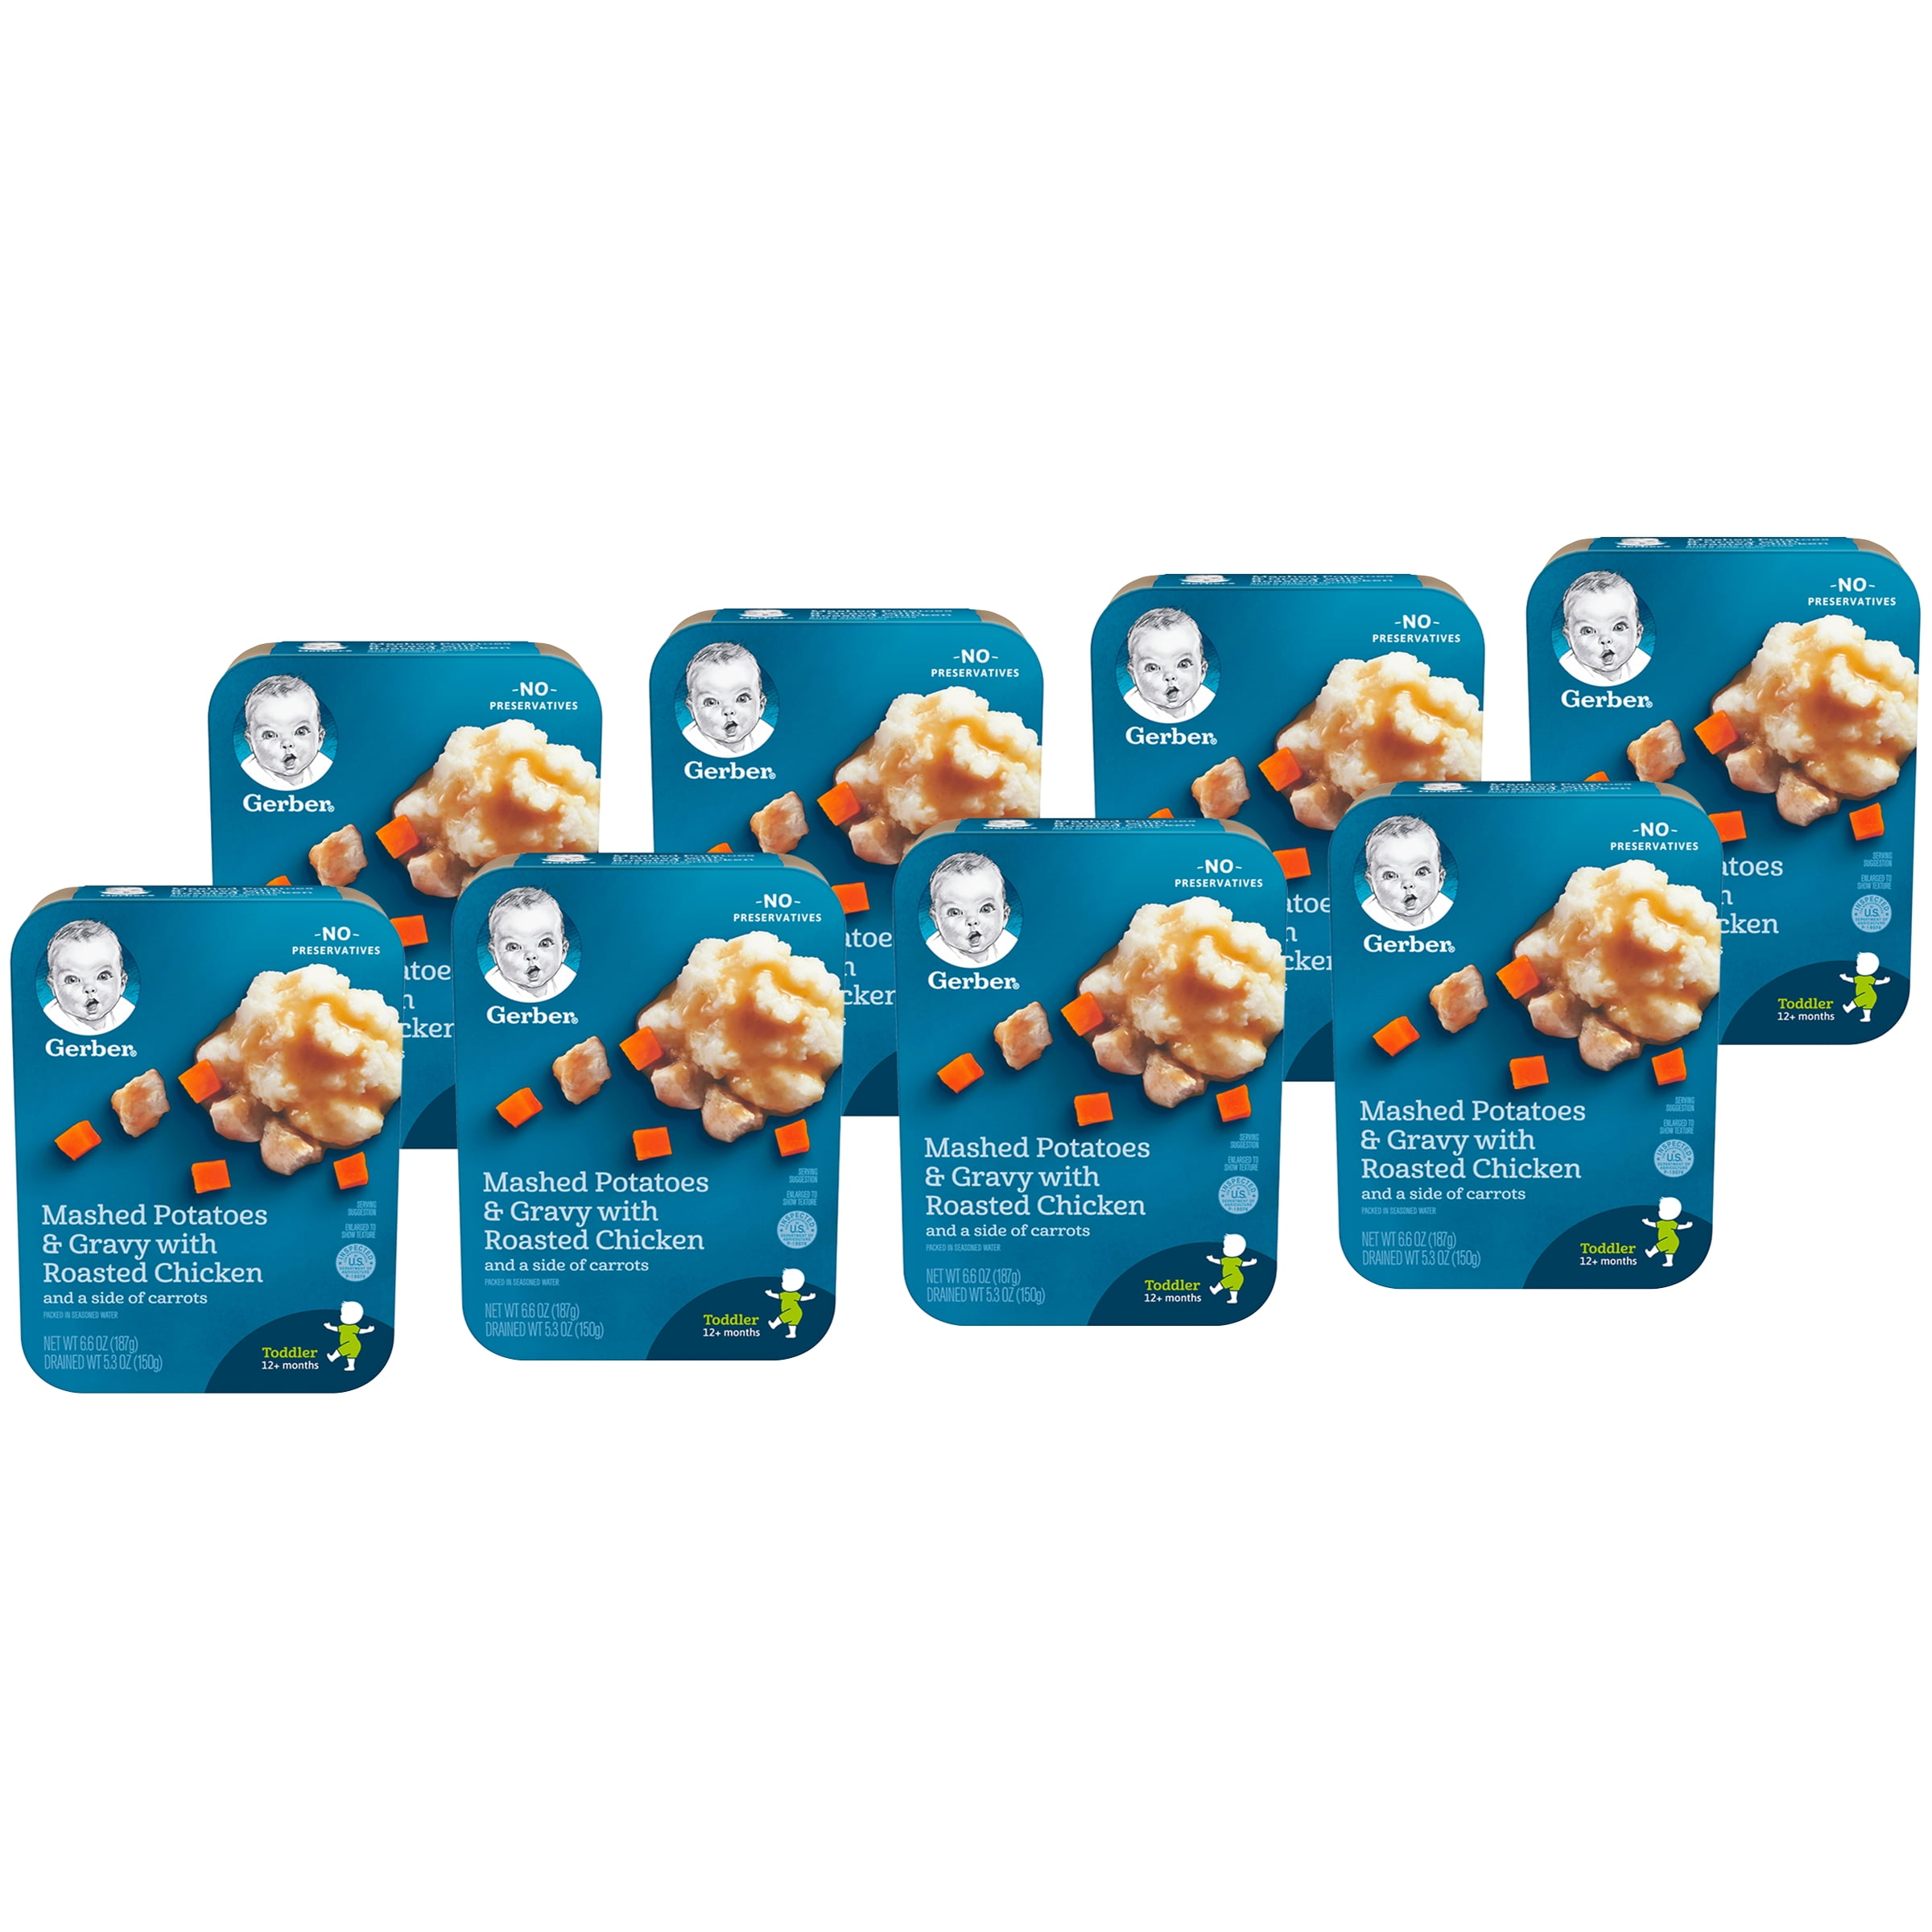 Gerber Lil' Entrees Toddler Baby Food, Mashed Potatoes & Gravy with Roasted Chicken, 6.6 oz Tray, 8 Pack